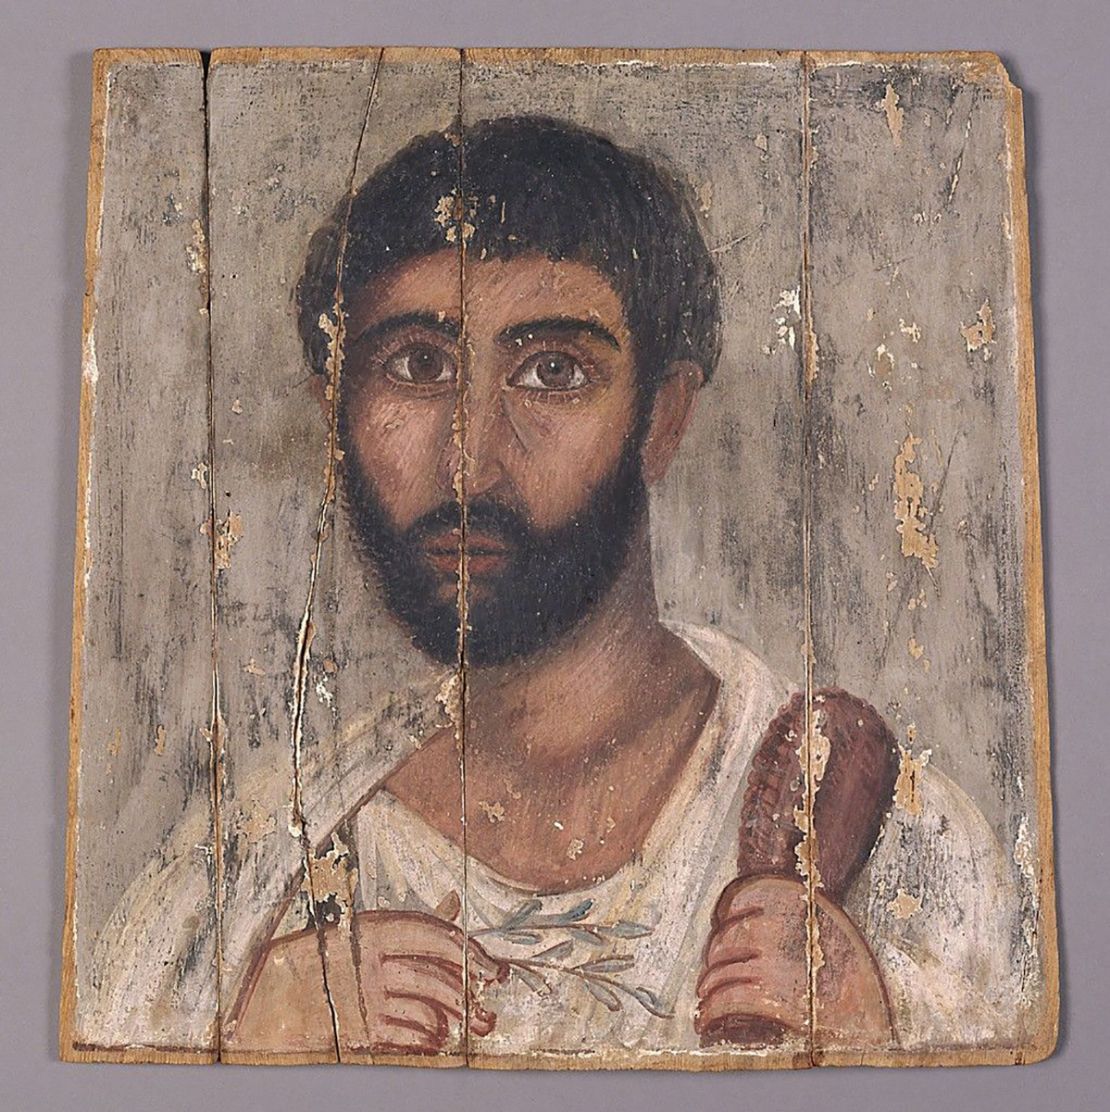 Portrait of a bearded man from a shrine, 100.